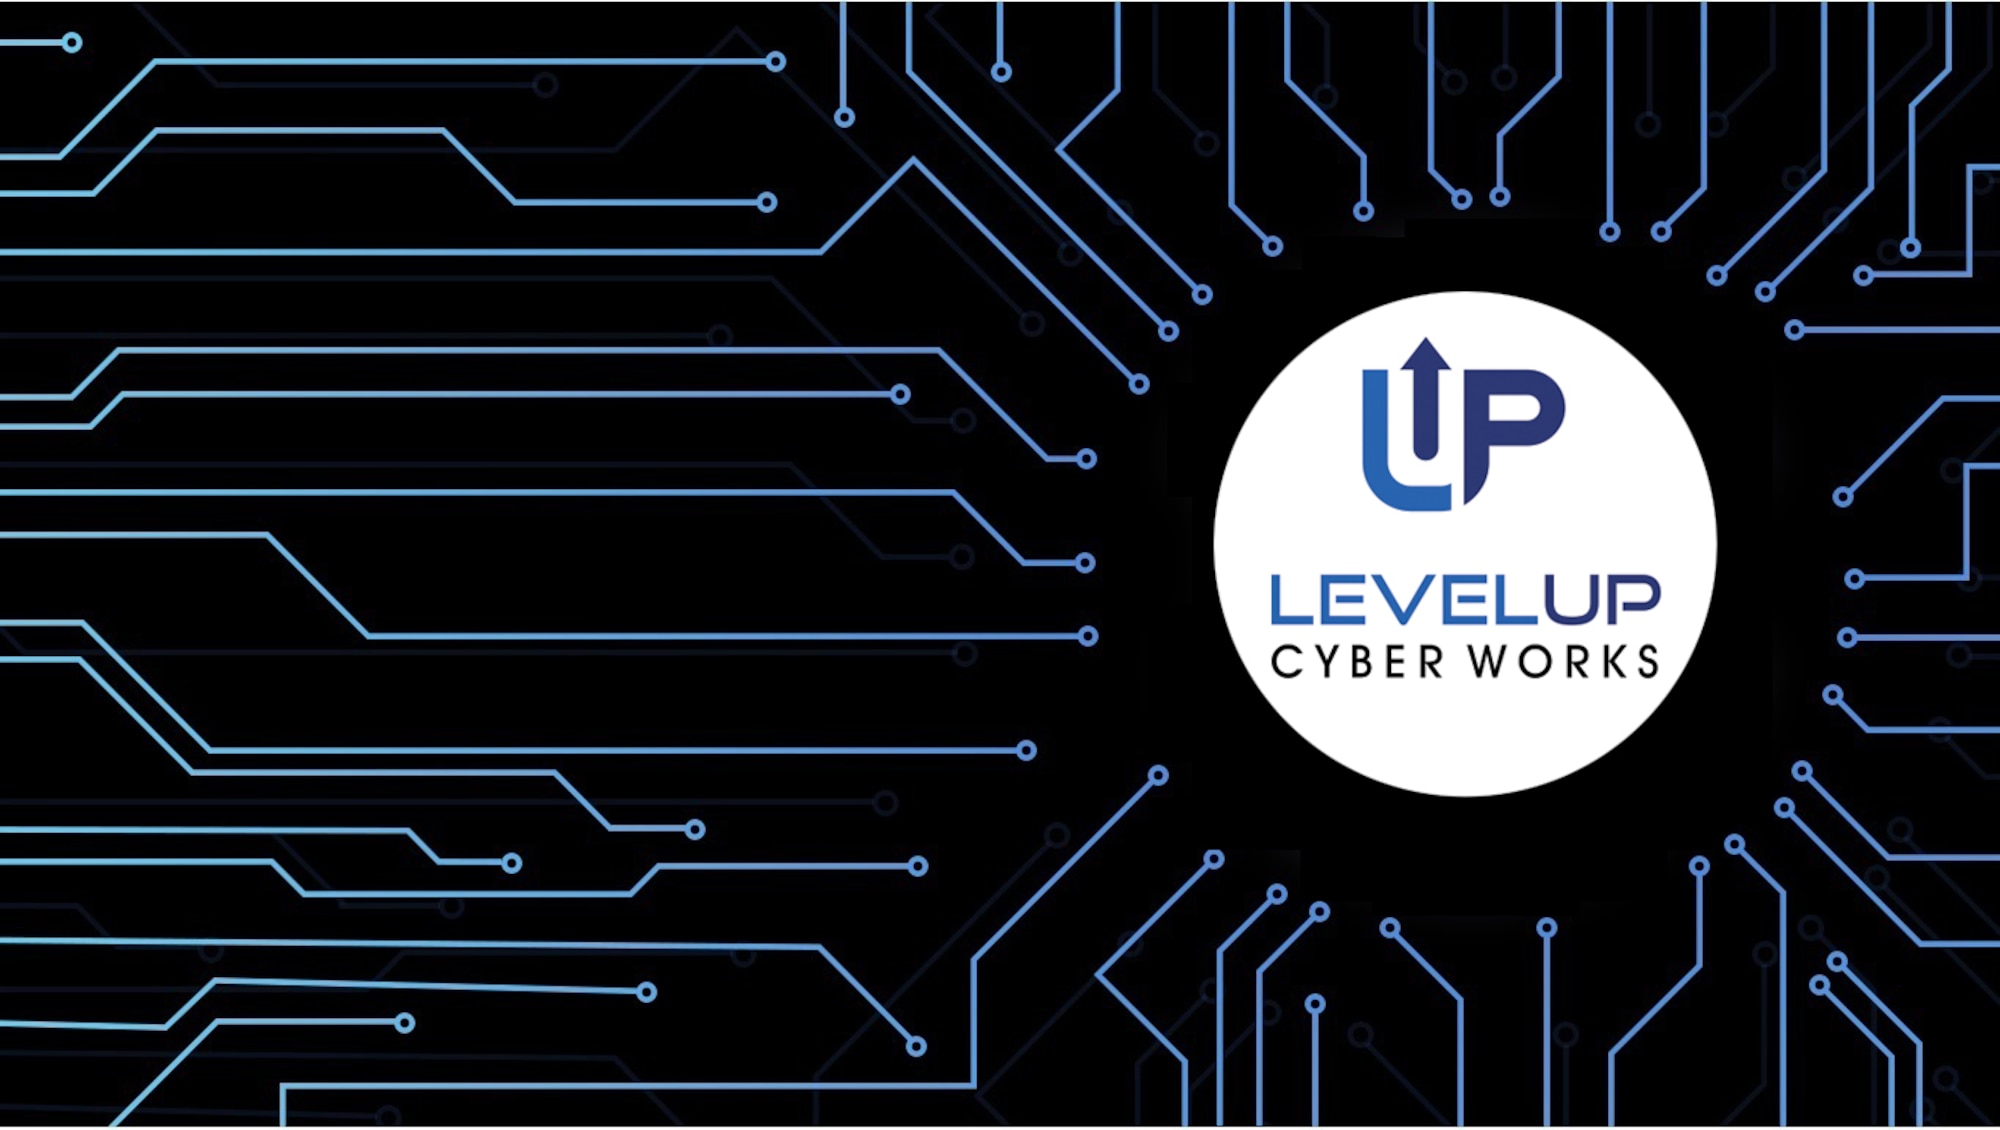 LevelUP Cyber Works is a “cyber factory” that will develop and field new capabilities. Unified Platform is a cyberspace operations system for those future cyber mission force capabilities. (U.S. Air Force Graphic by Benjamin Newell)